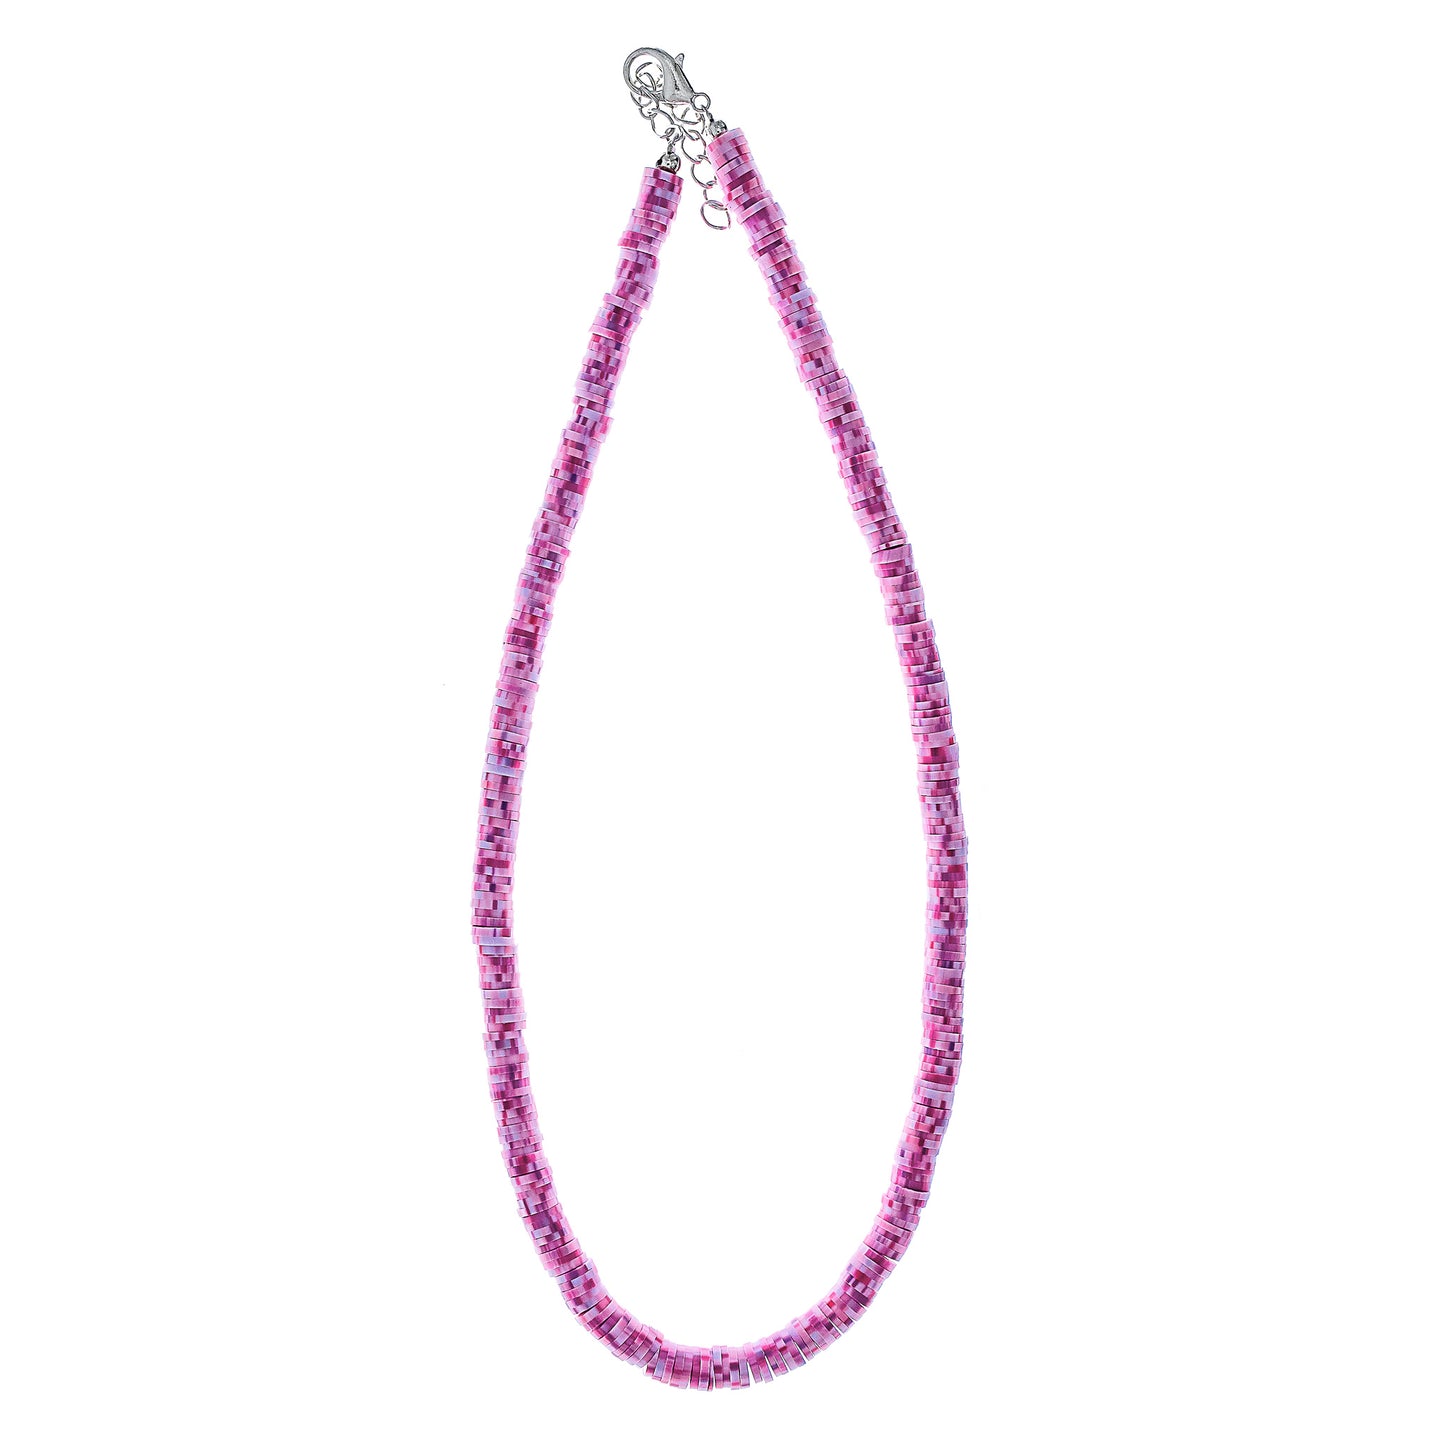 Solid Fimo Beads Necklace